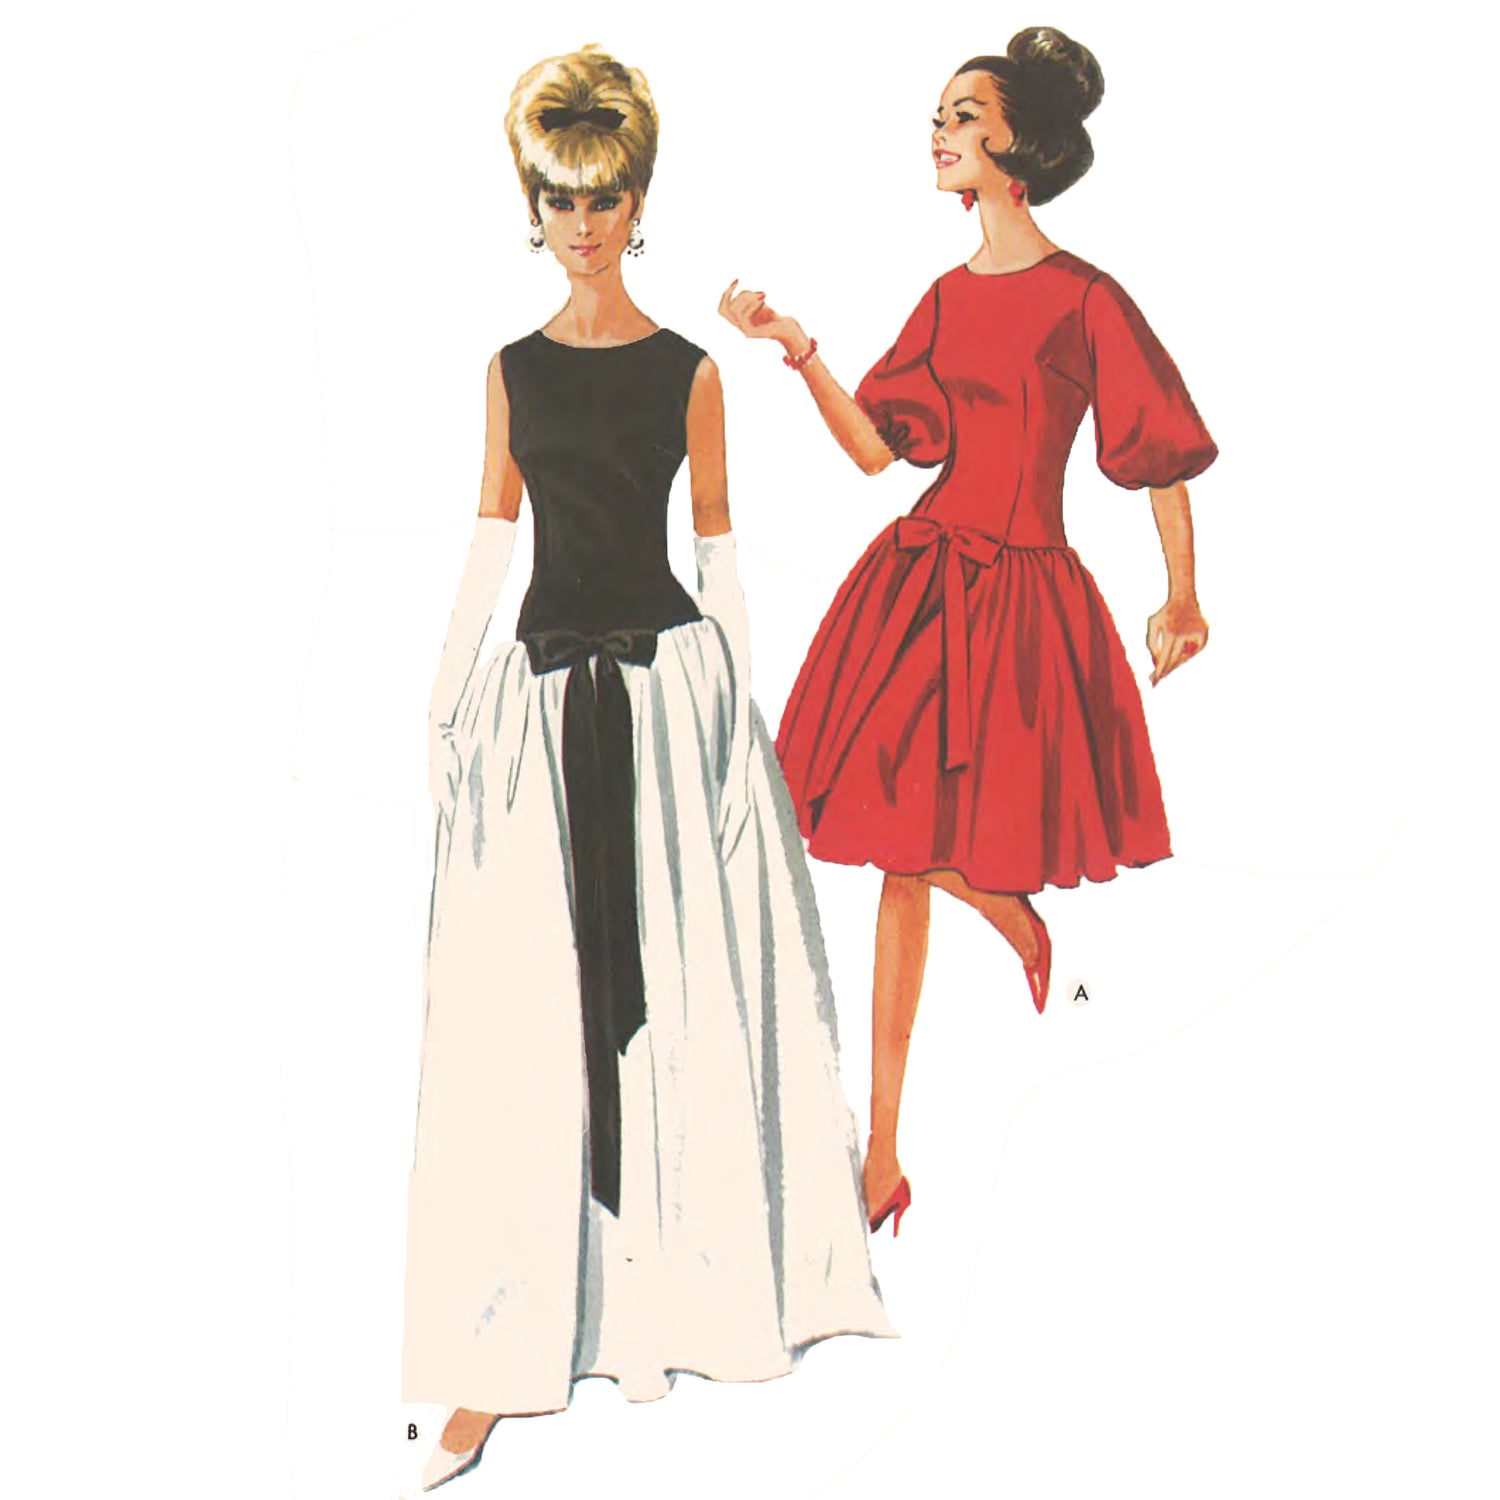 Women wearing evening dresses made from sewing pattern McCall's 7426